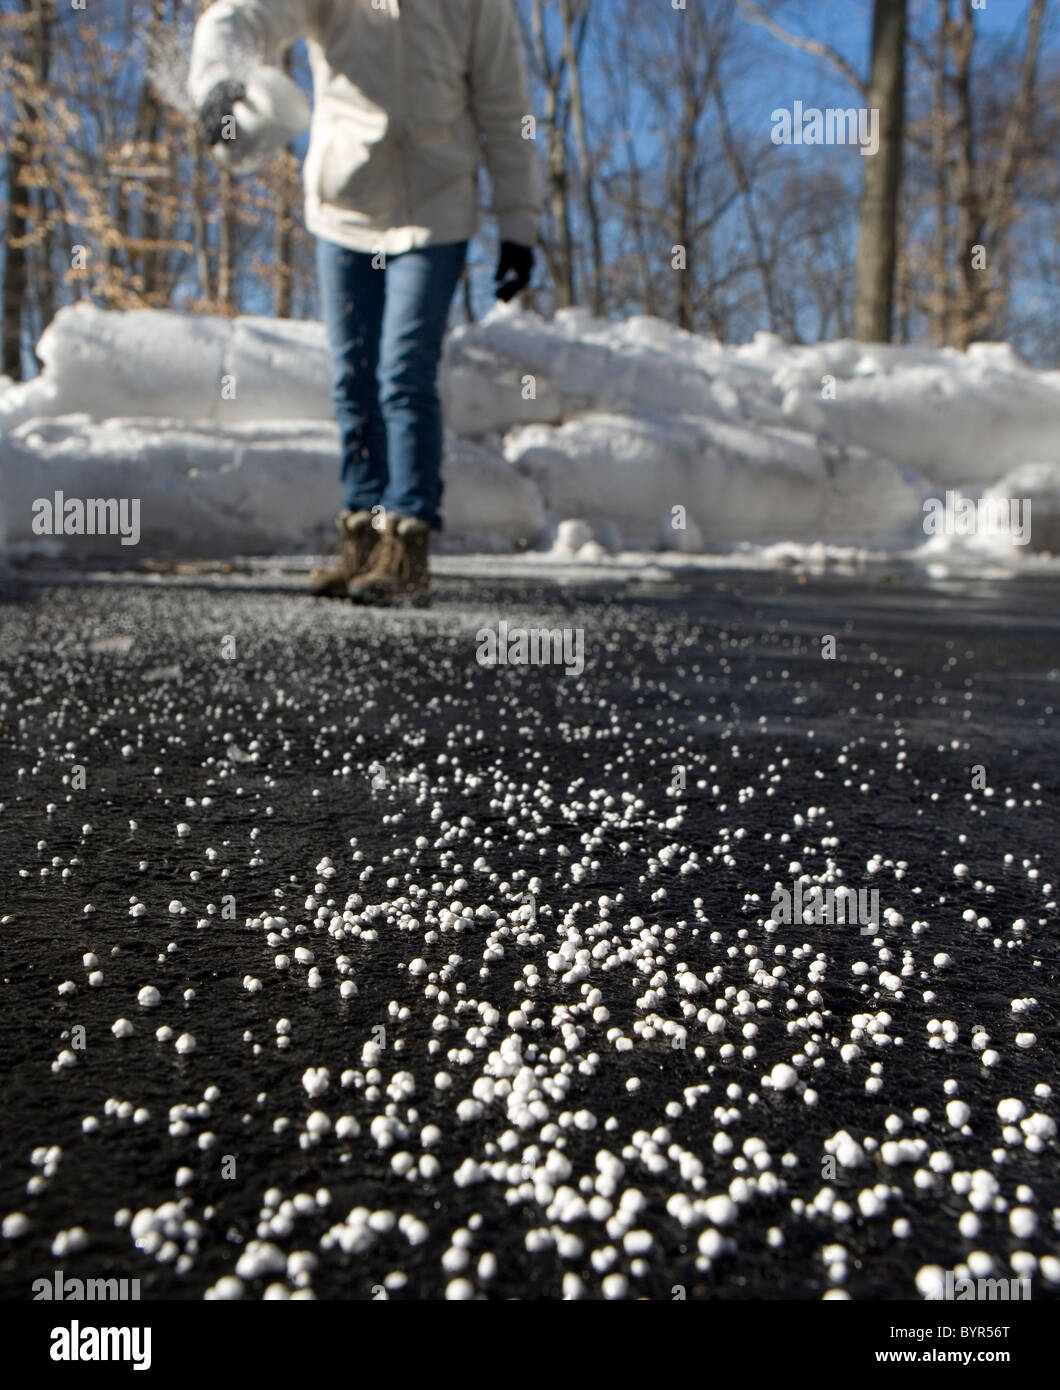 A woman throwing salt on a driveway to melt the ice and snow Stock Photo